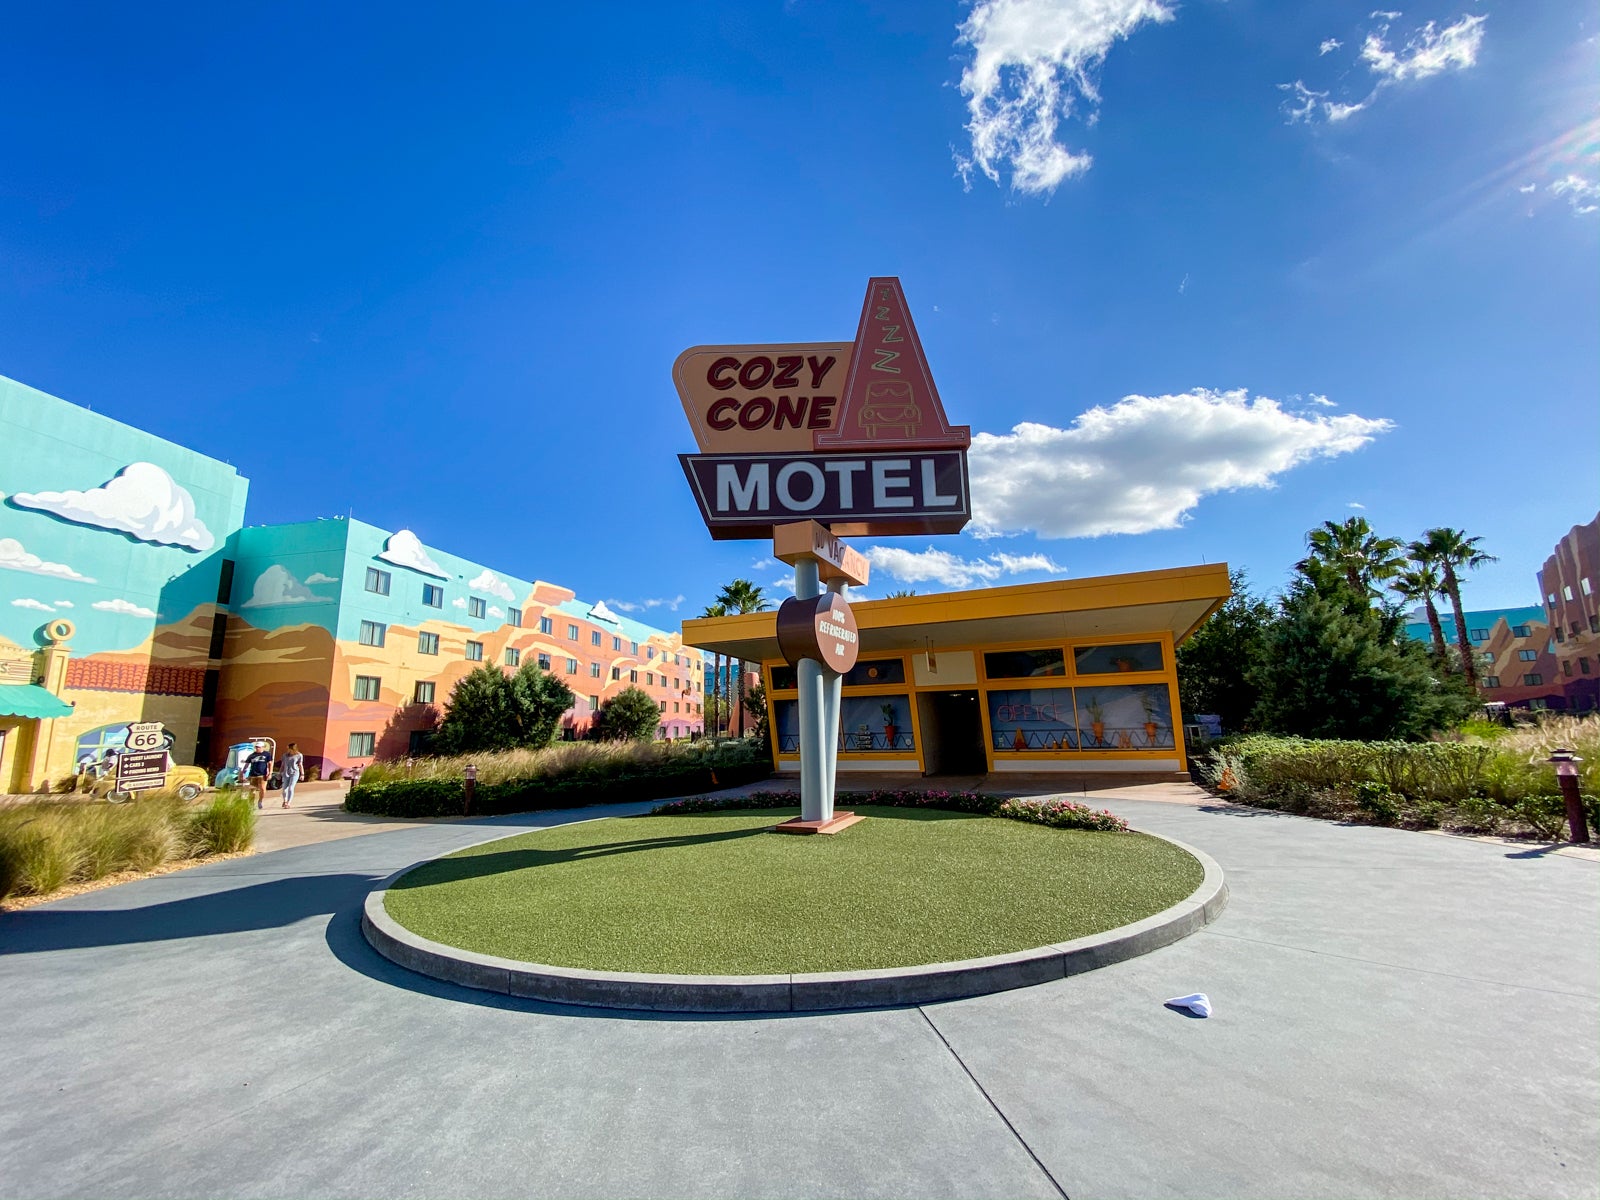 The best hotels at Disney World in 2021